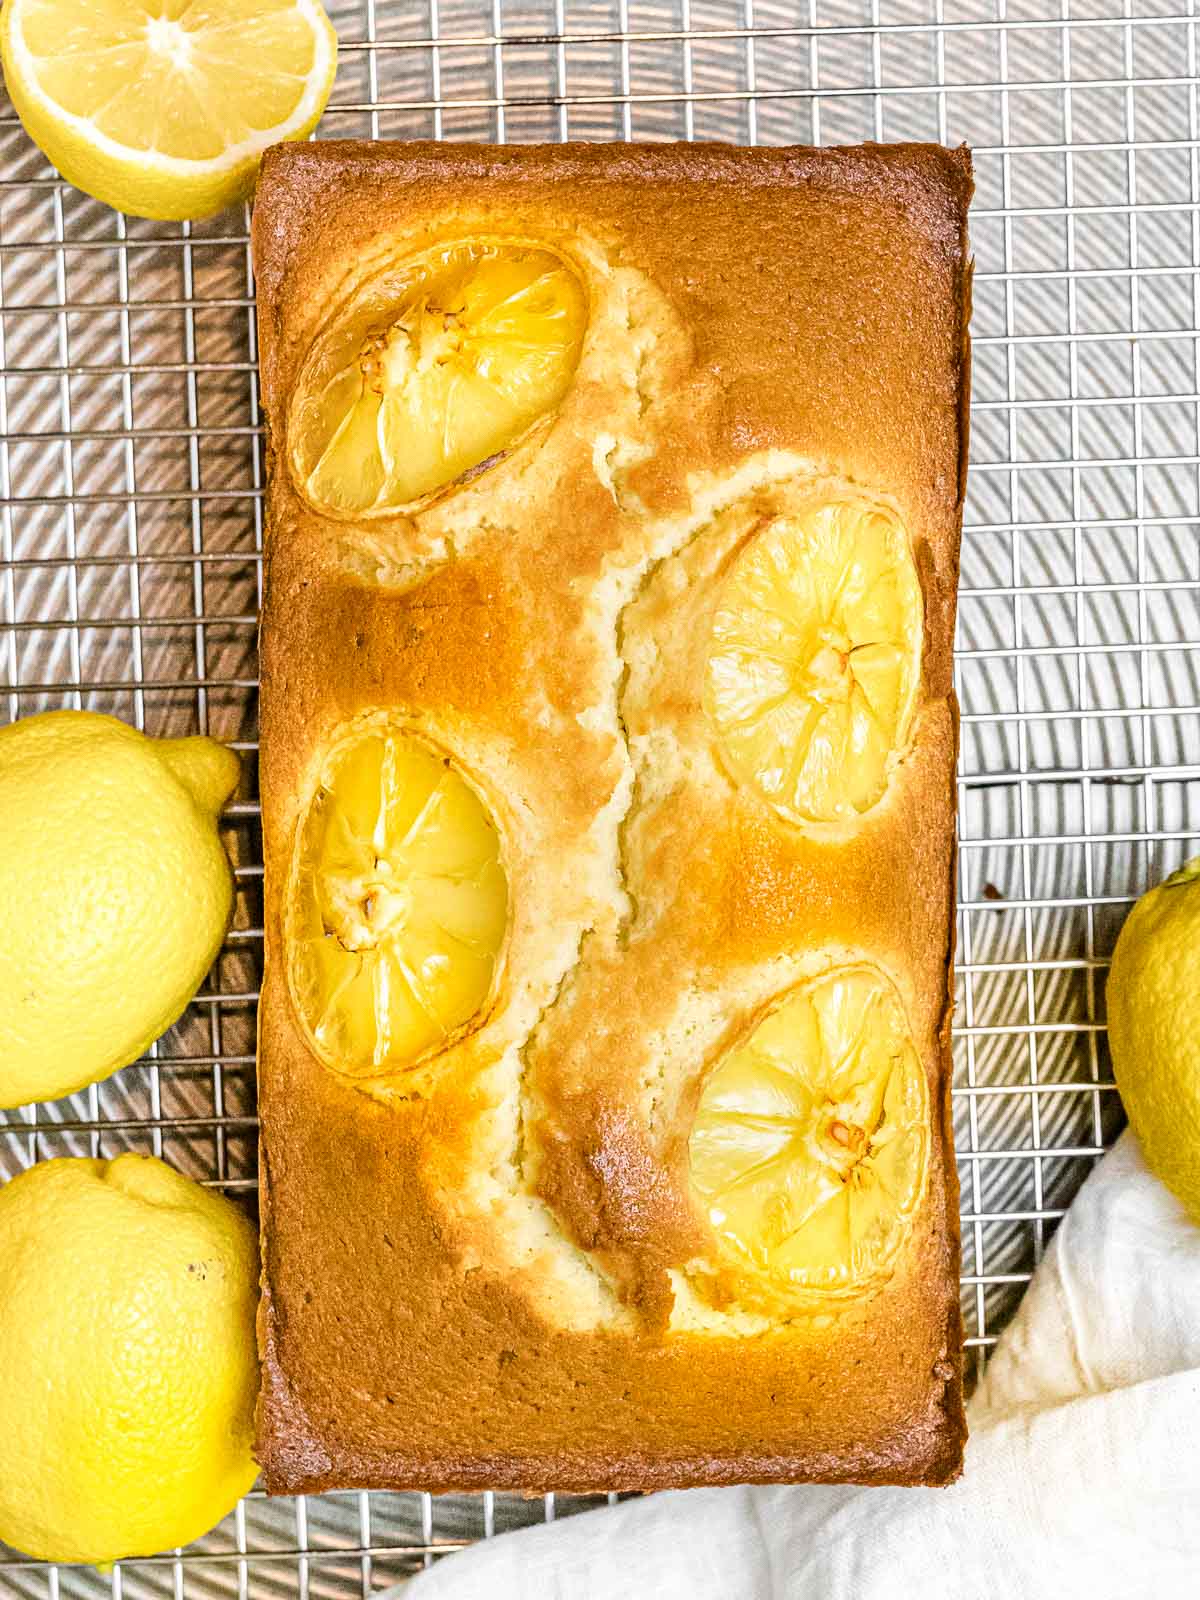 lemon pound cake with golden brown crust topped with four slices of lemon on a cooling rack